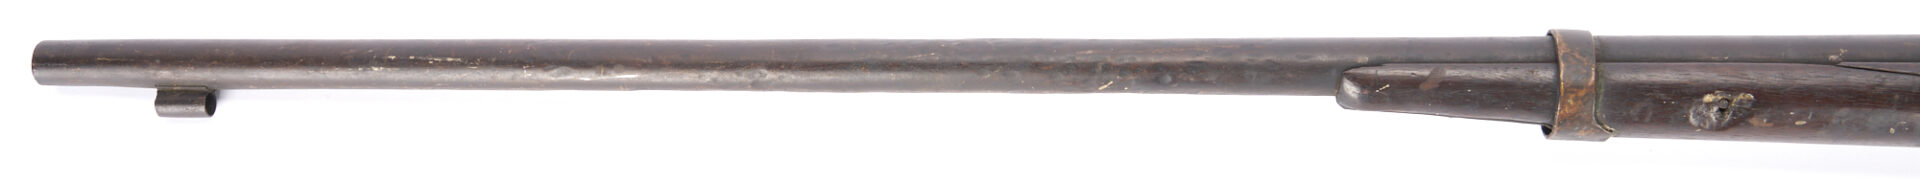 Lot 528: Two 19th Century Guns from the Collection of Walter M. Cline